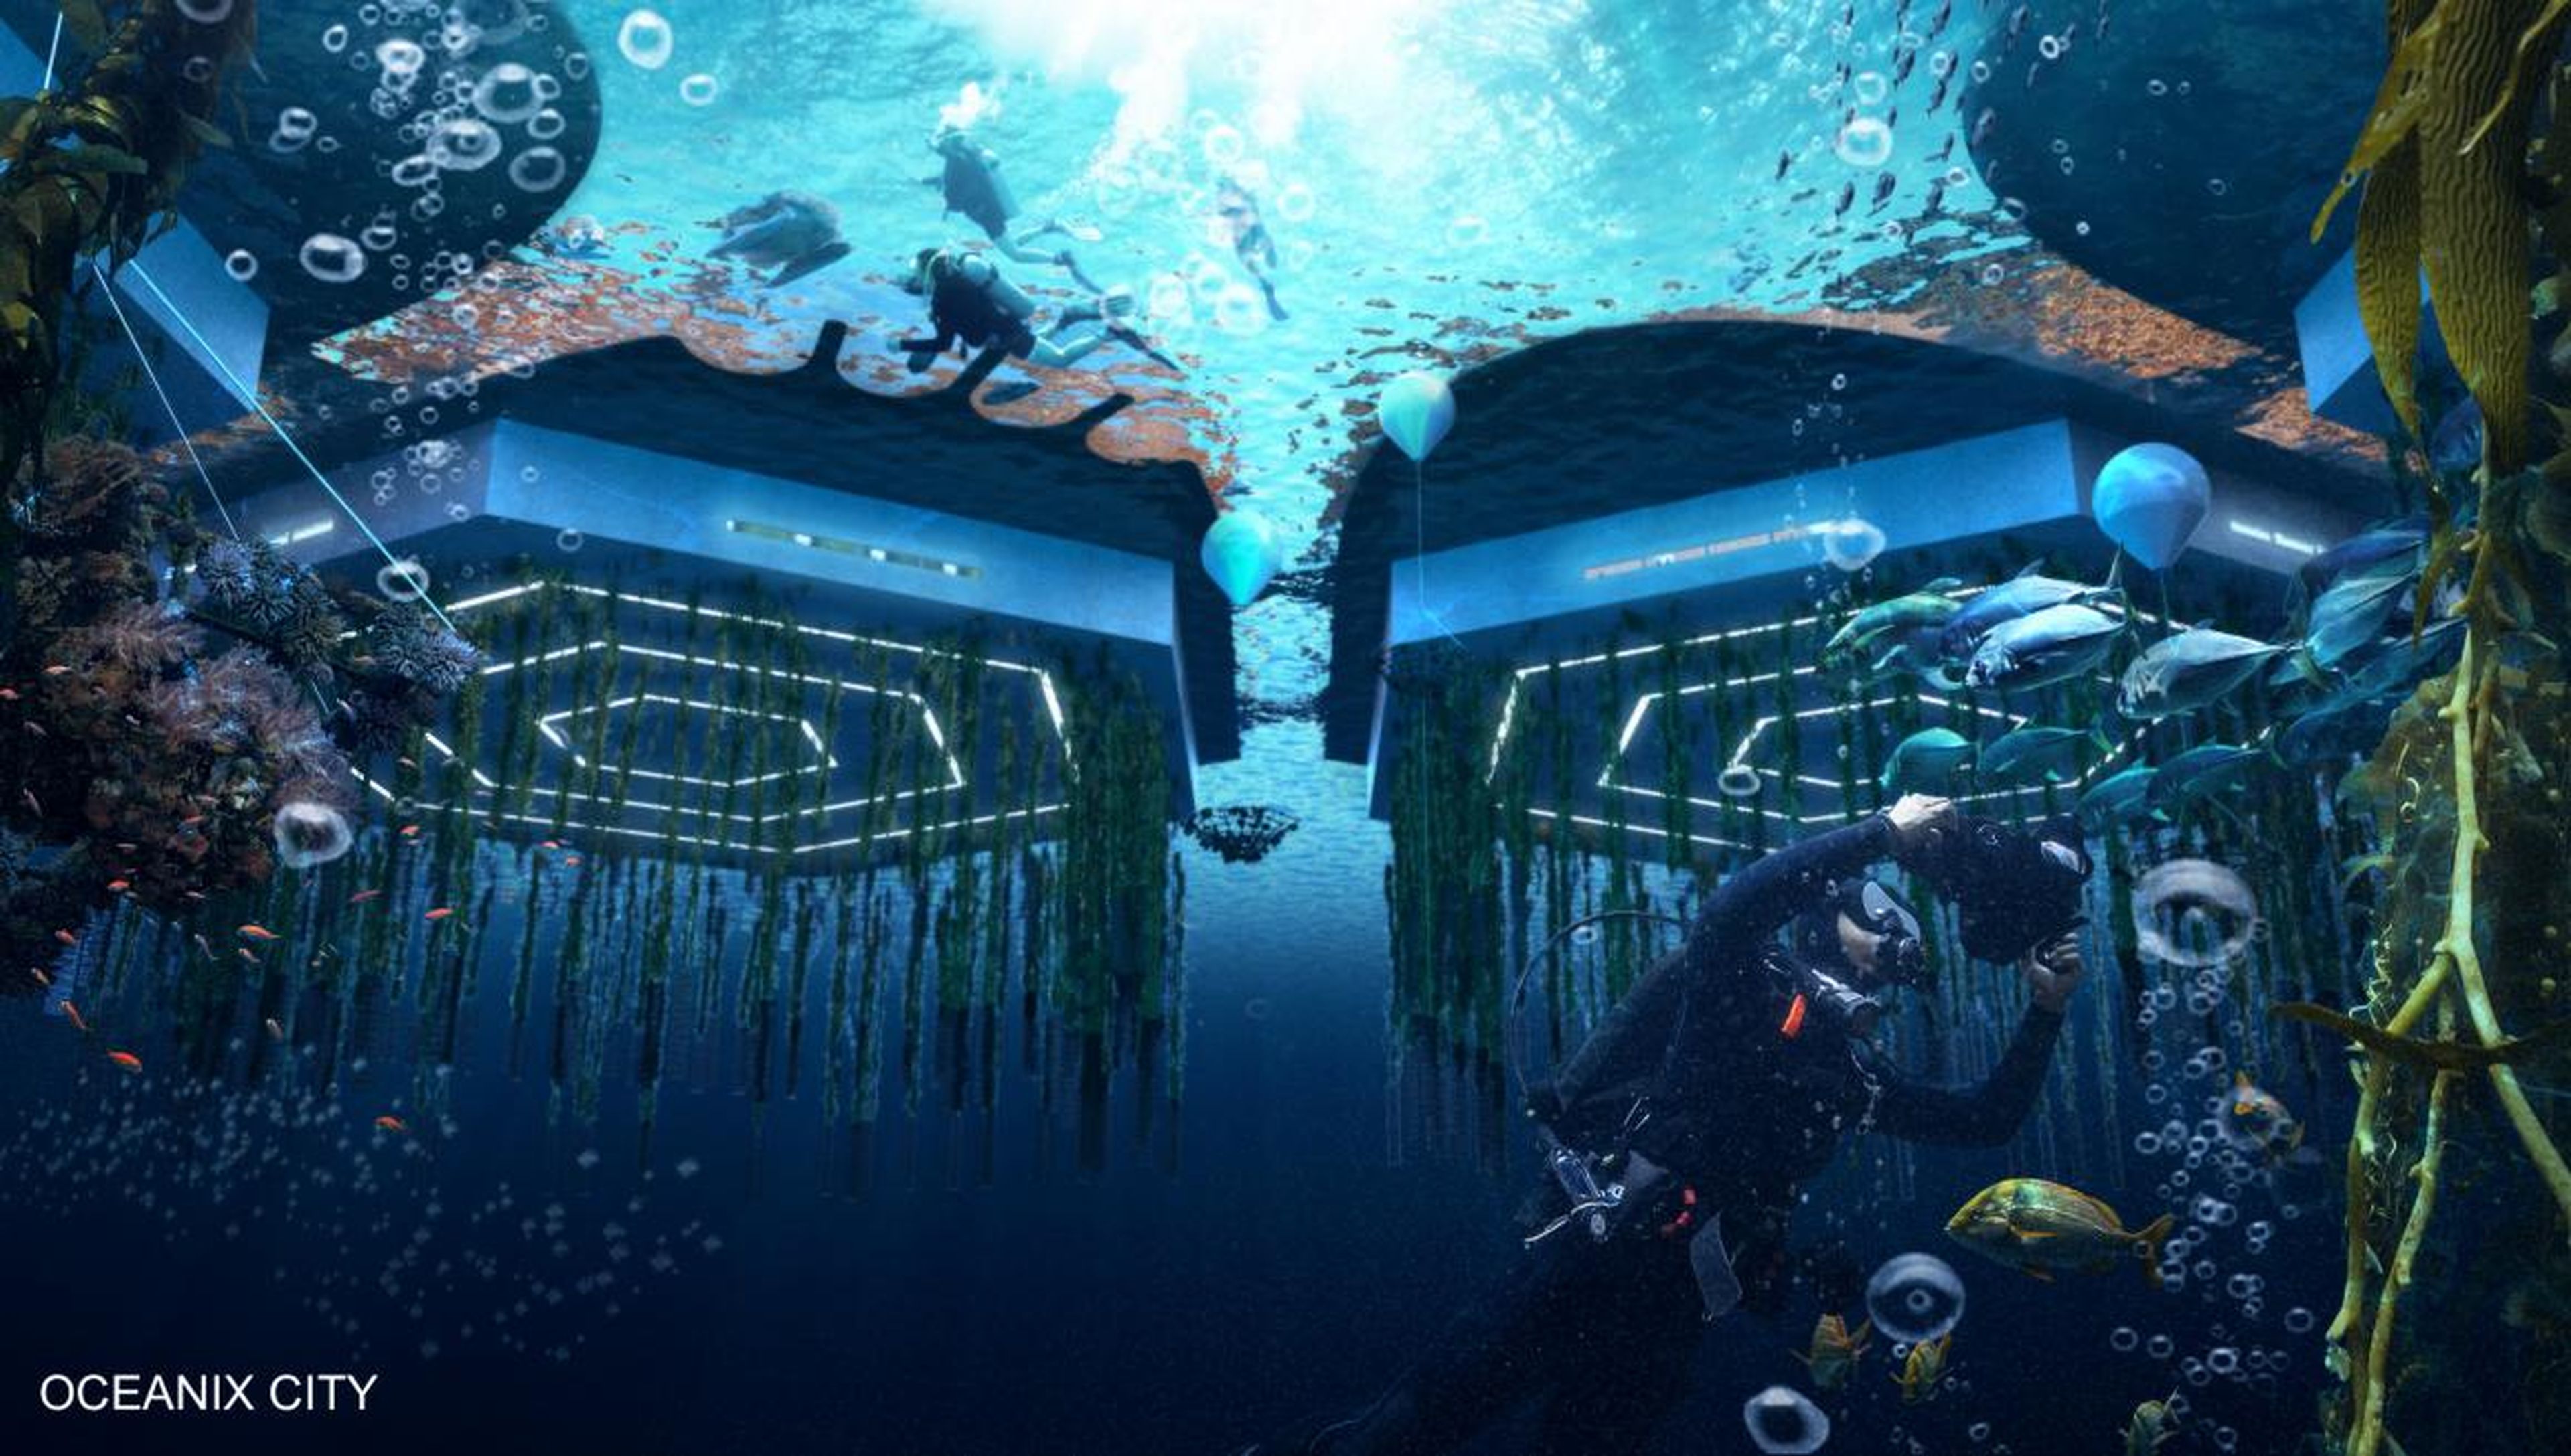 The concept calls for "ocean farming," which would involve growing food beneath the surface of the water.